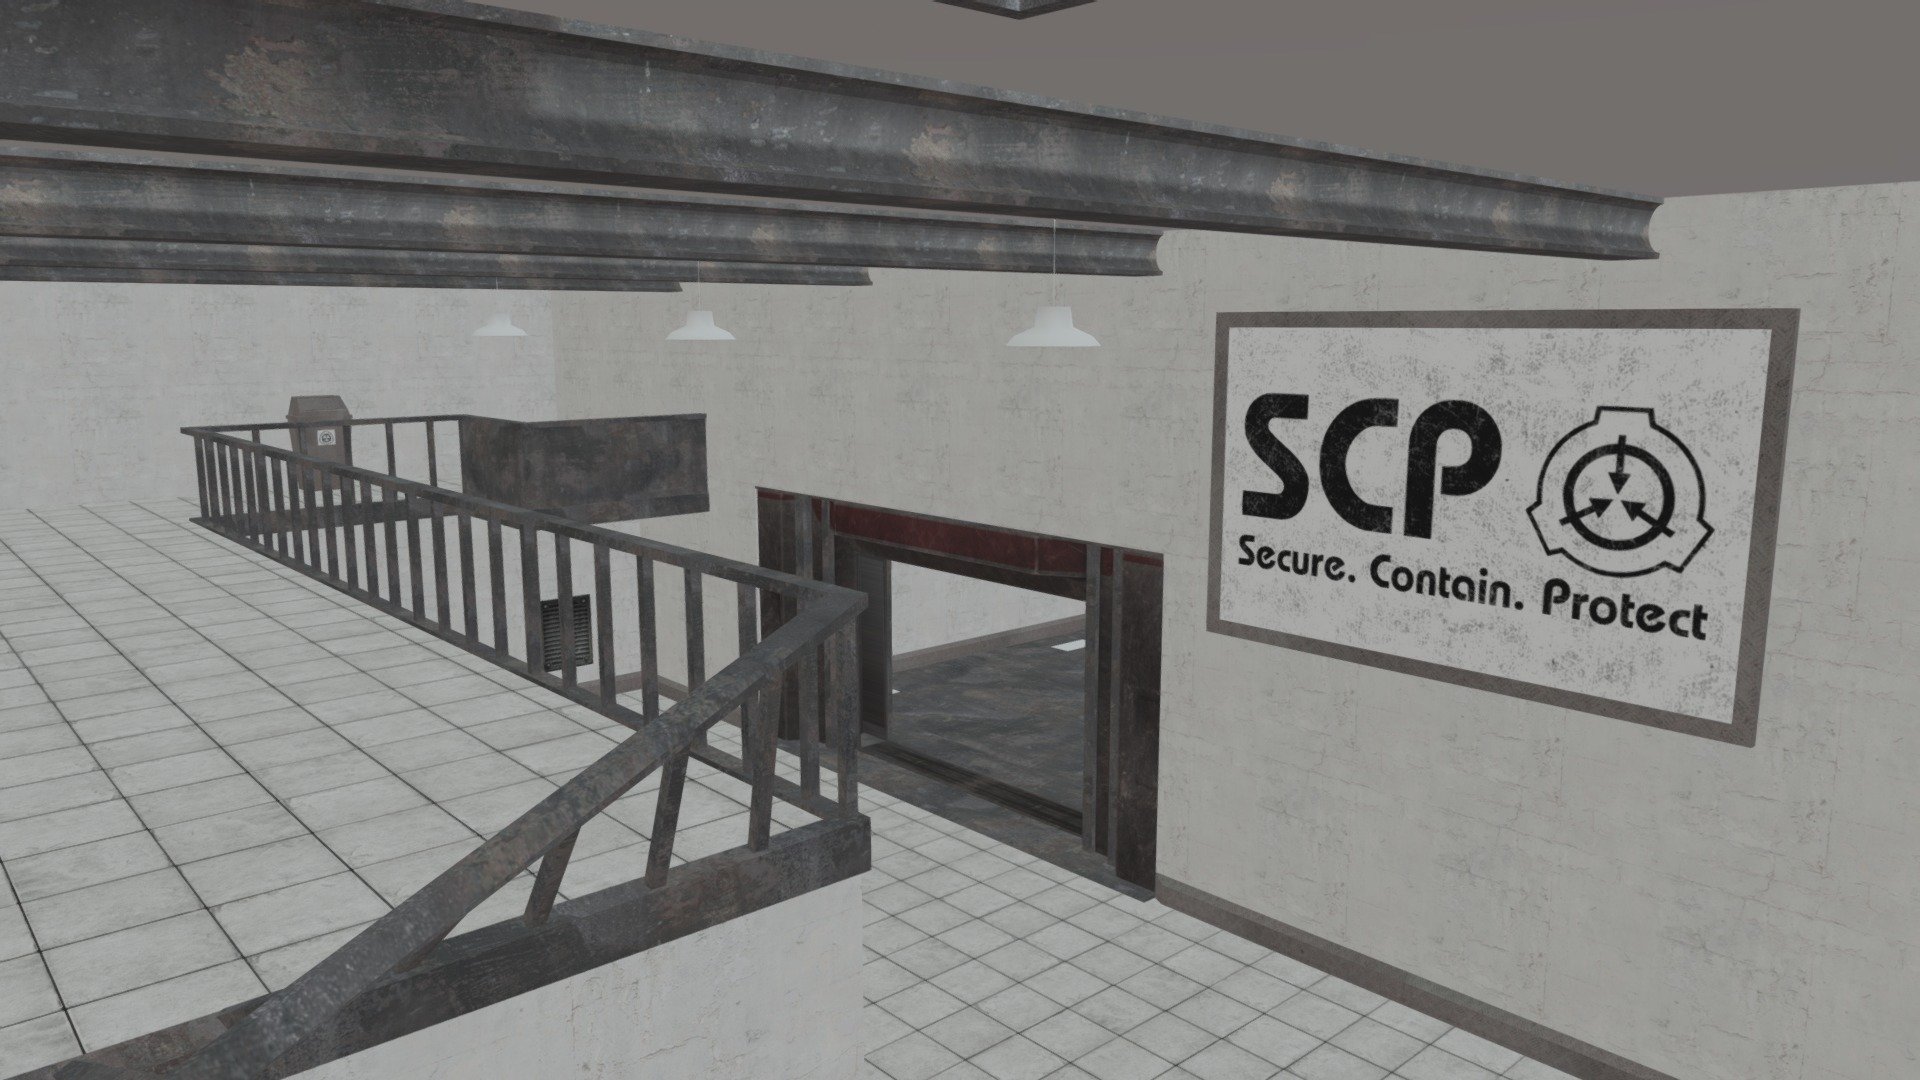 SCP 966 Containment Chamber - Download Free 3D model by Maxime66410  (@Maxime66410) [a8f629f]